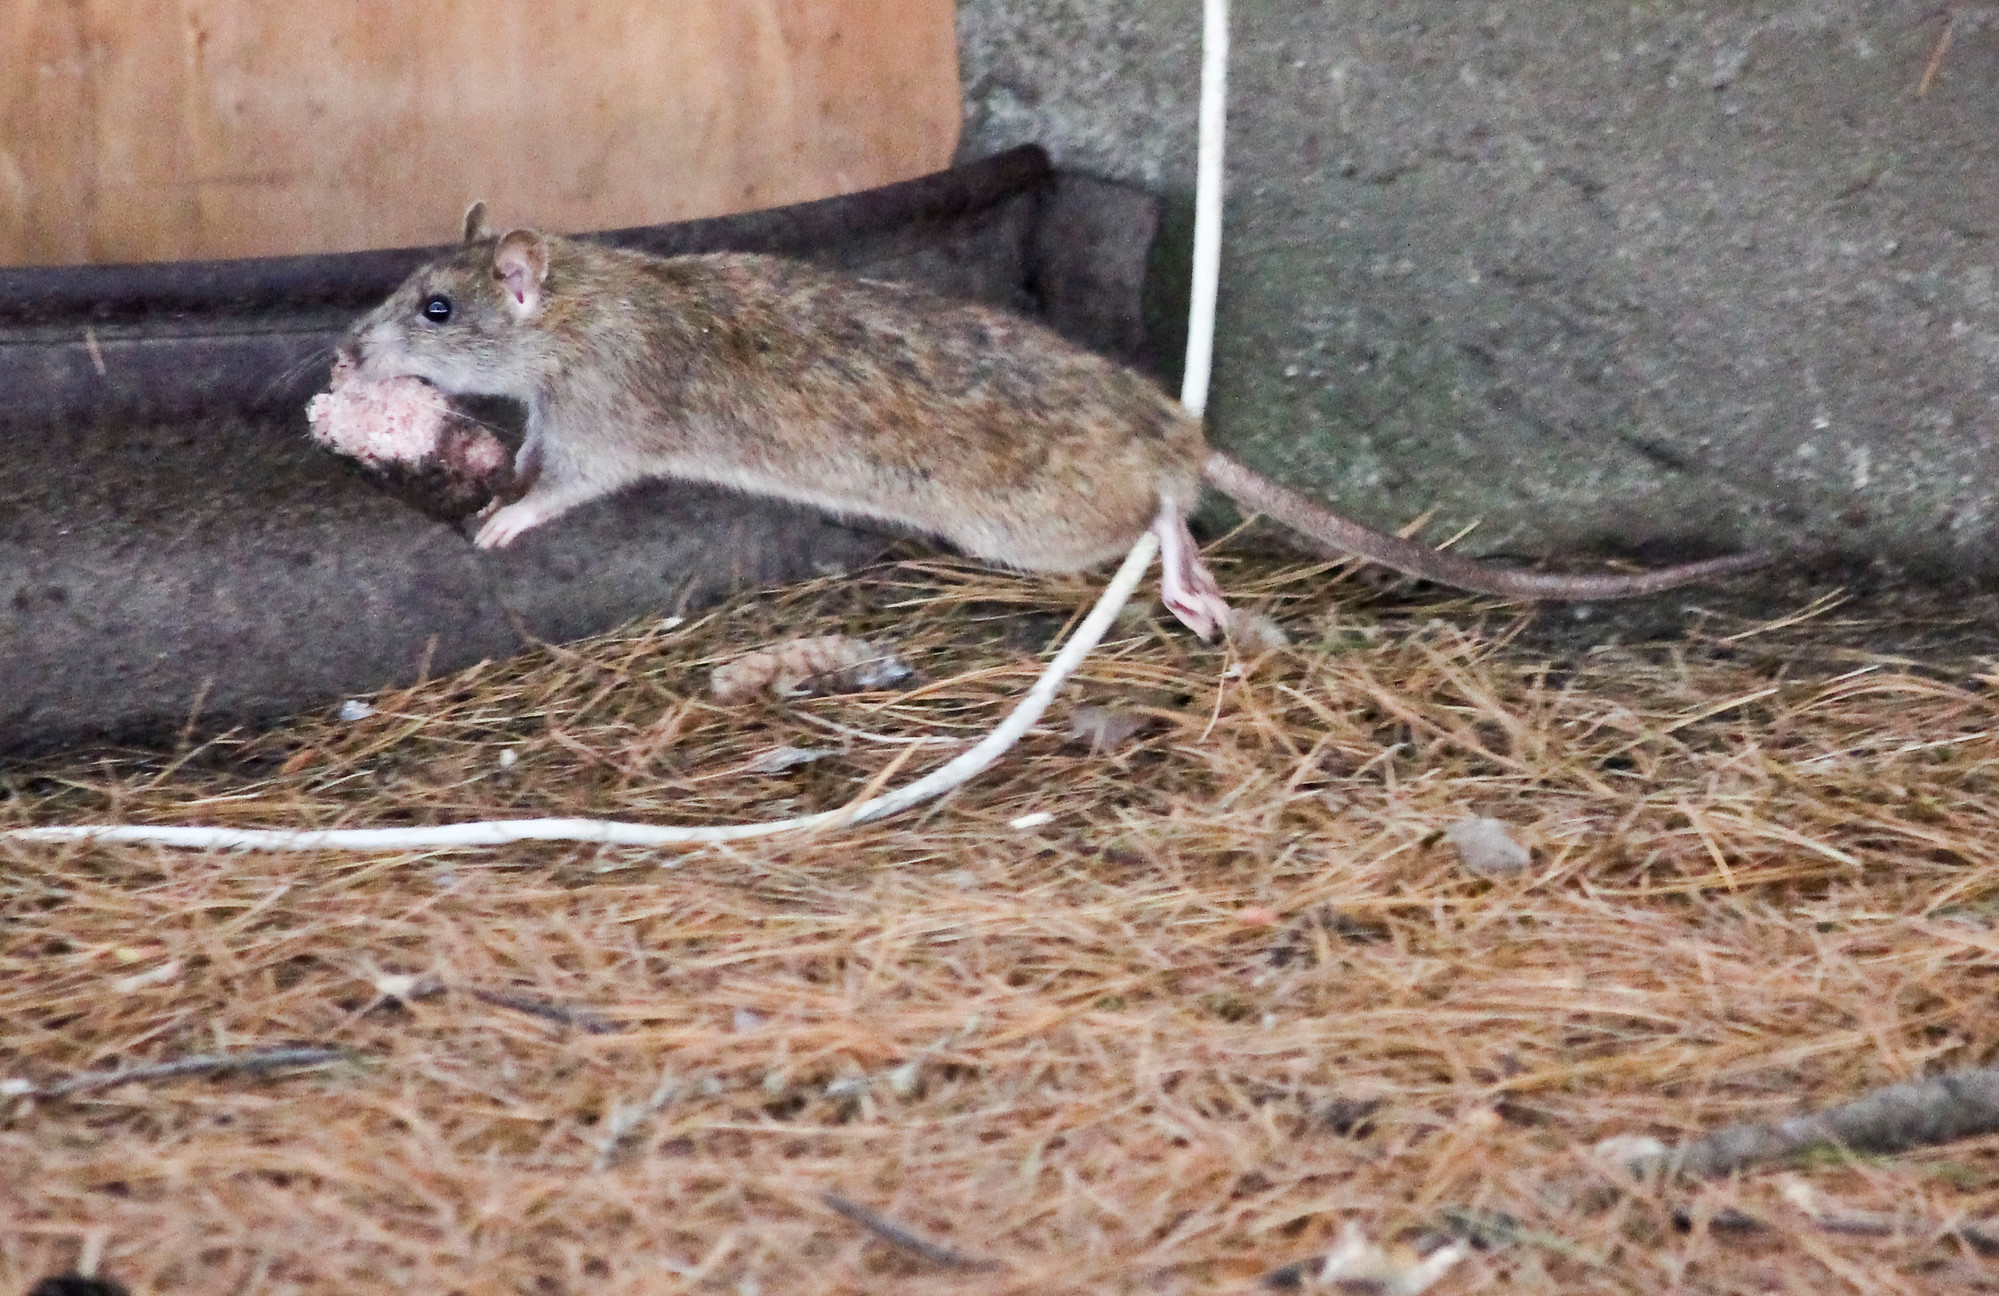 Rats were a common sight on the property, before an exterminator visited the site in late March.